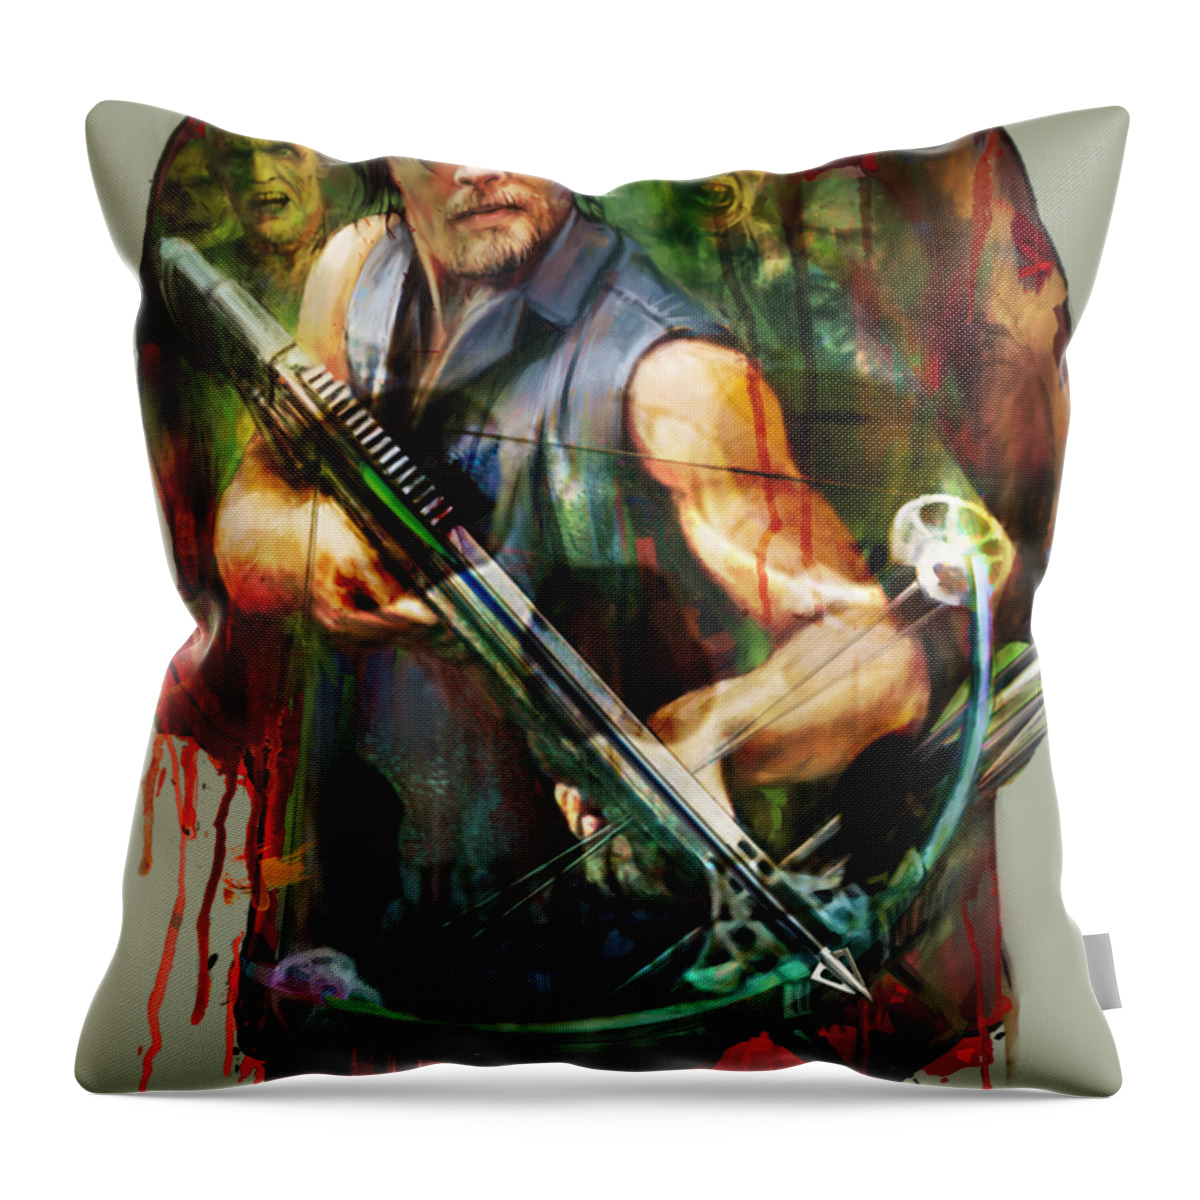 Wall Art Throw Pillow featuring the painting Walking Dead Mask by Robert Corsetti